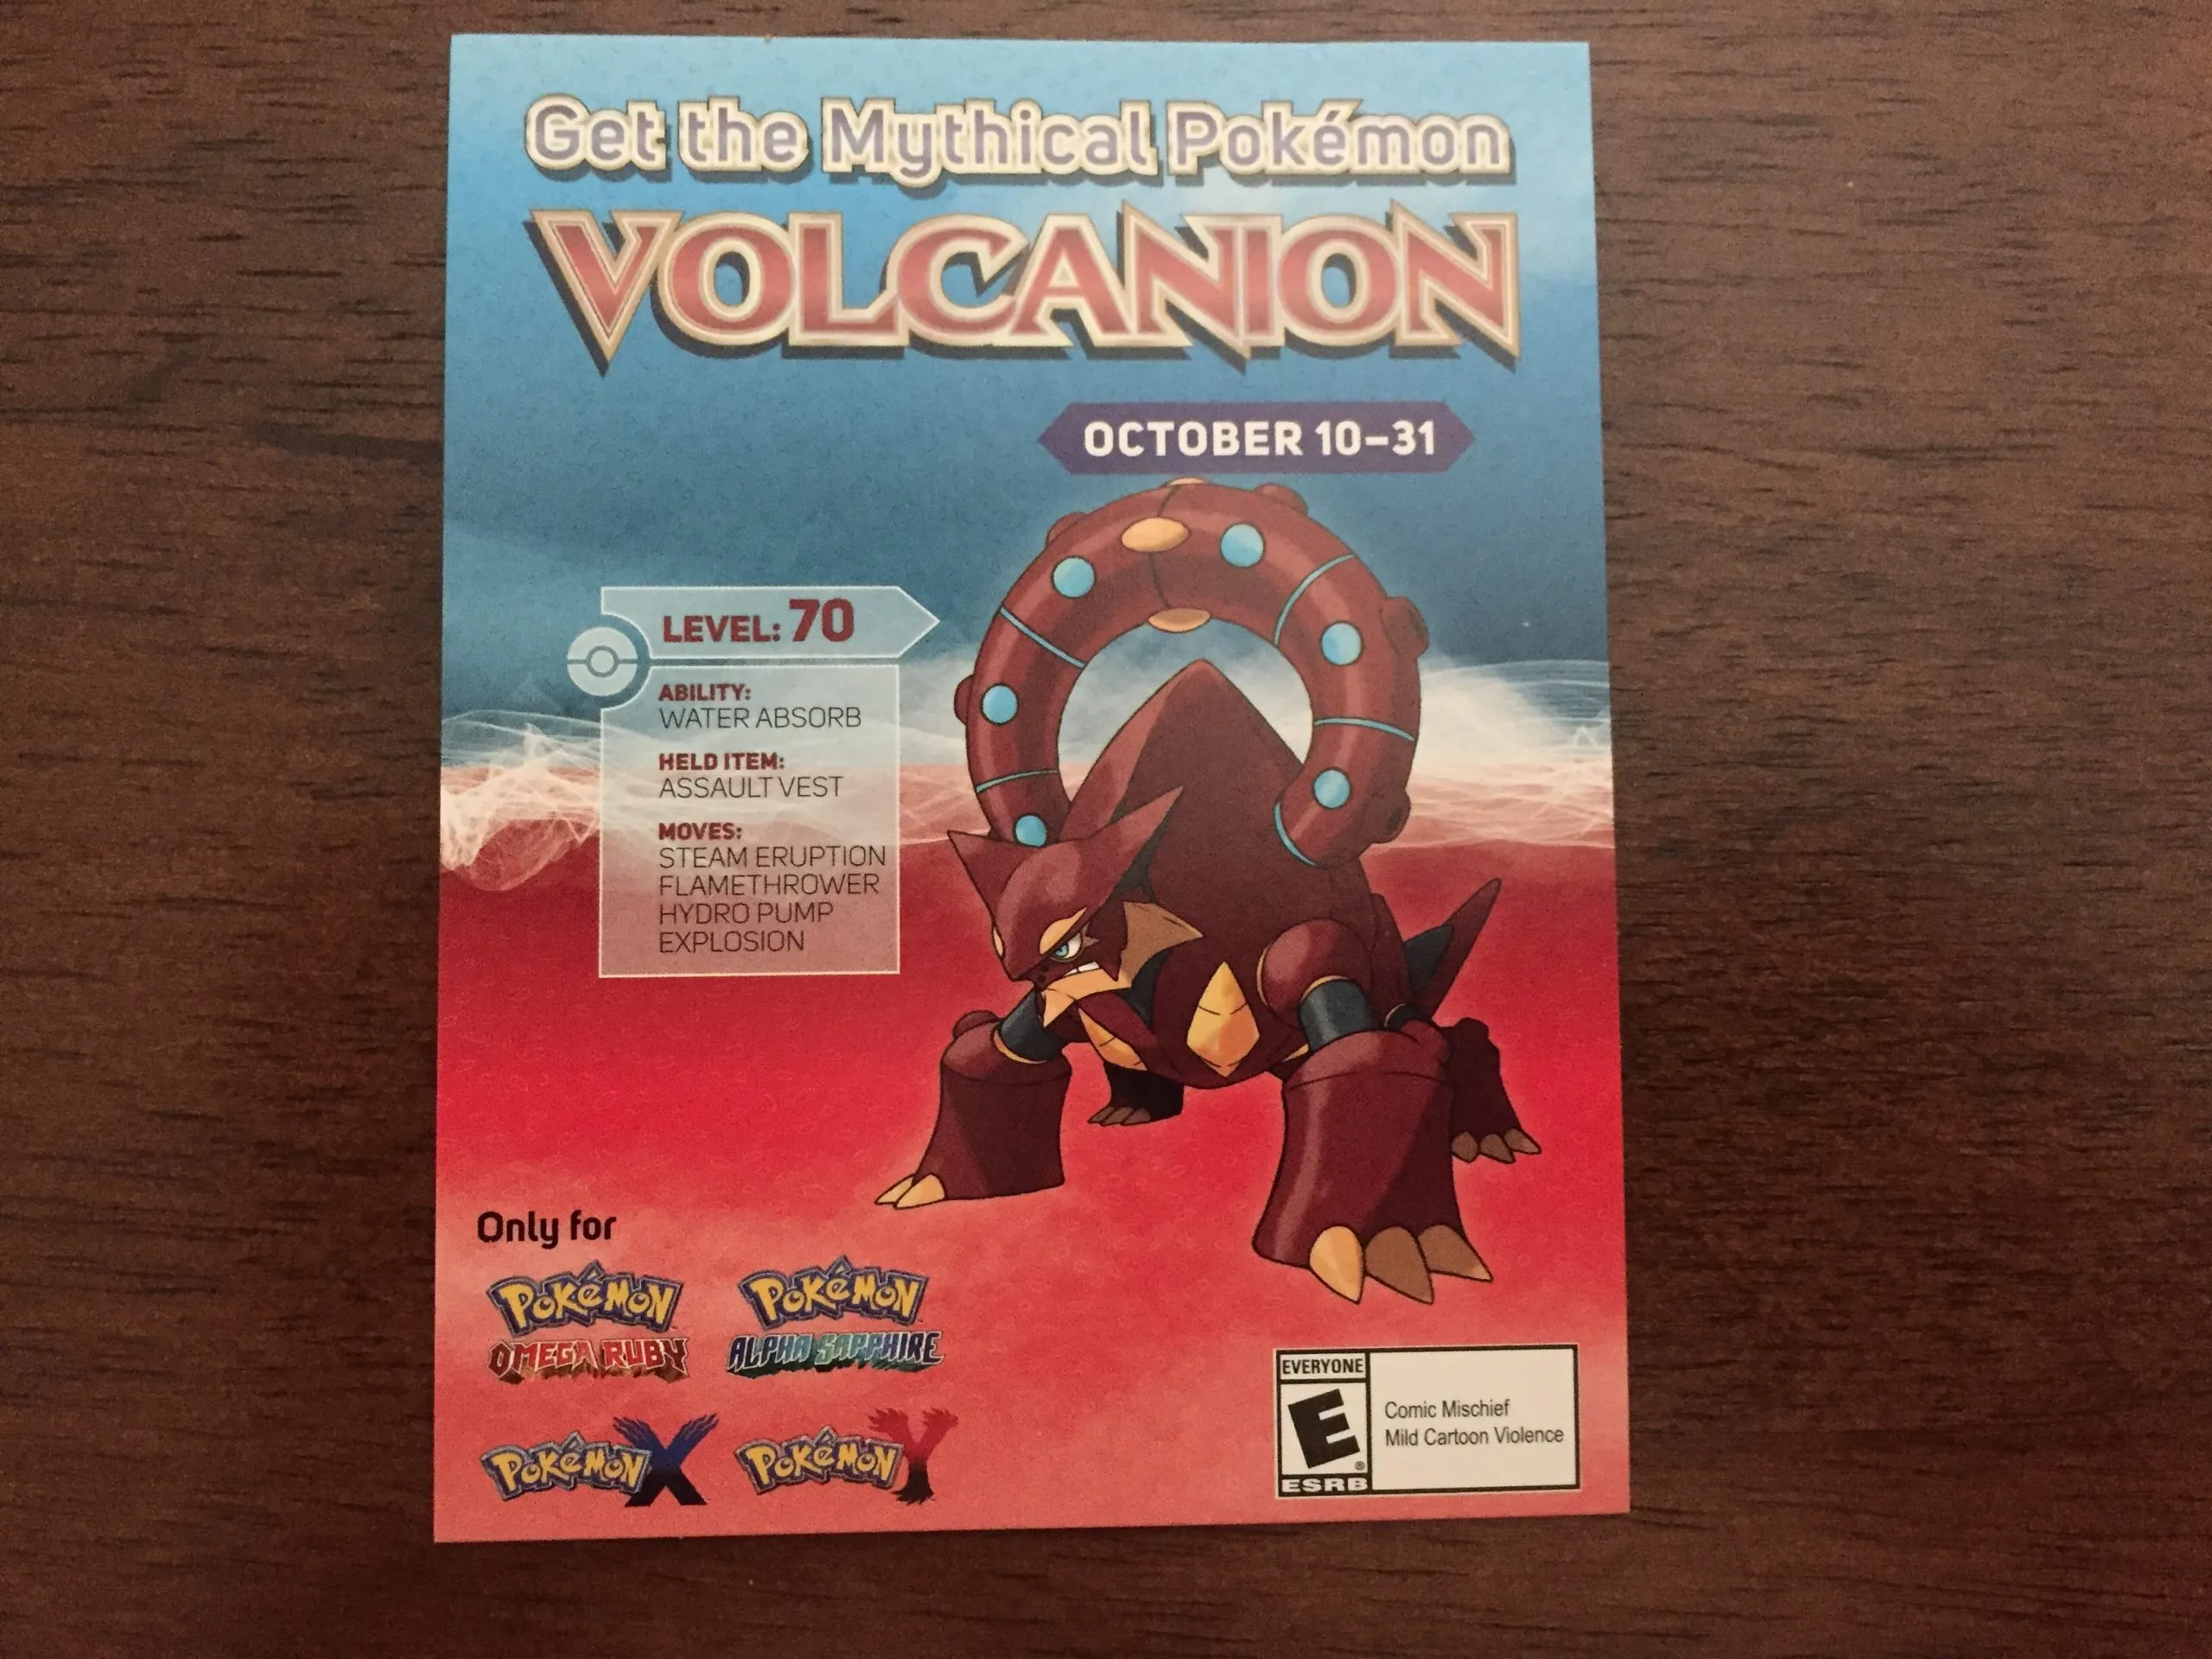 Volcanion Pokemon cards roll out nationally today in the ...